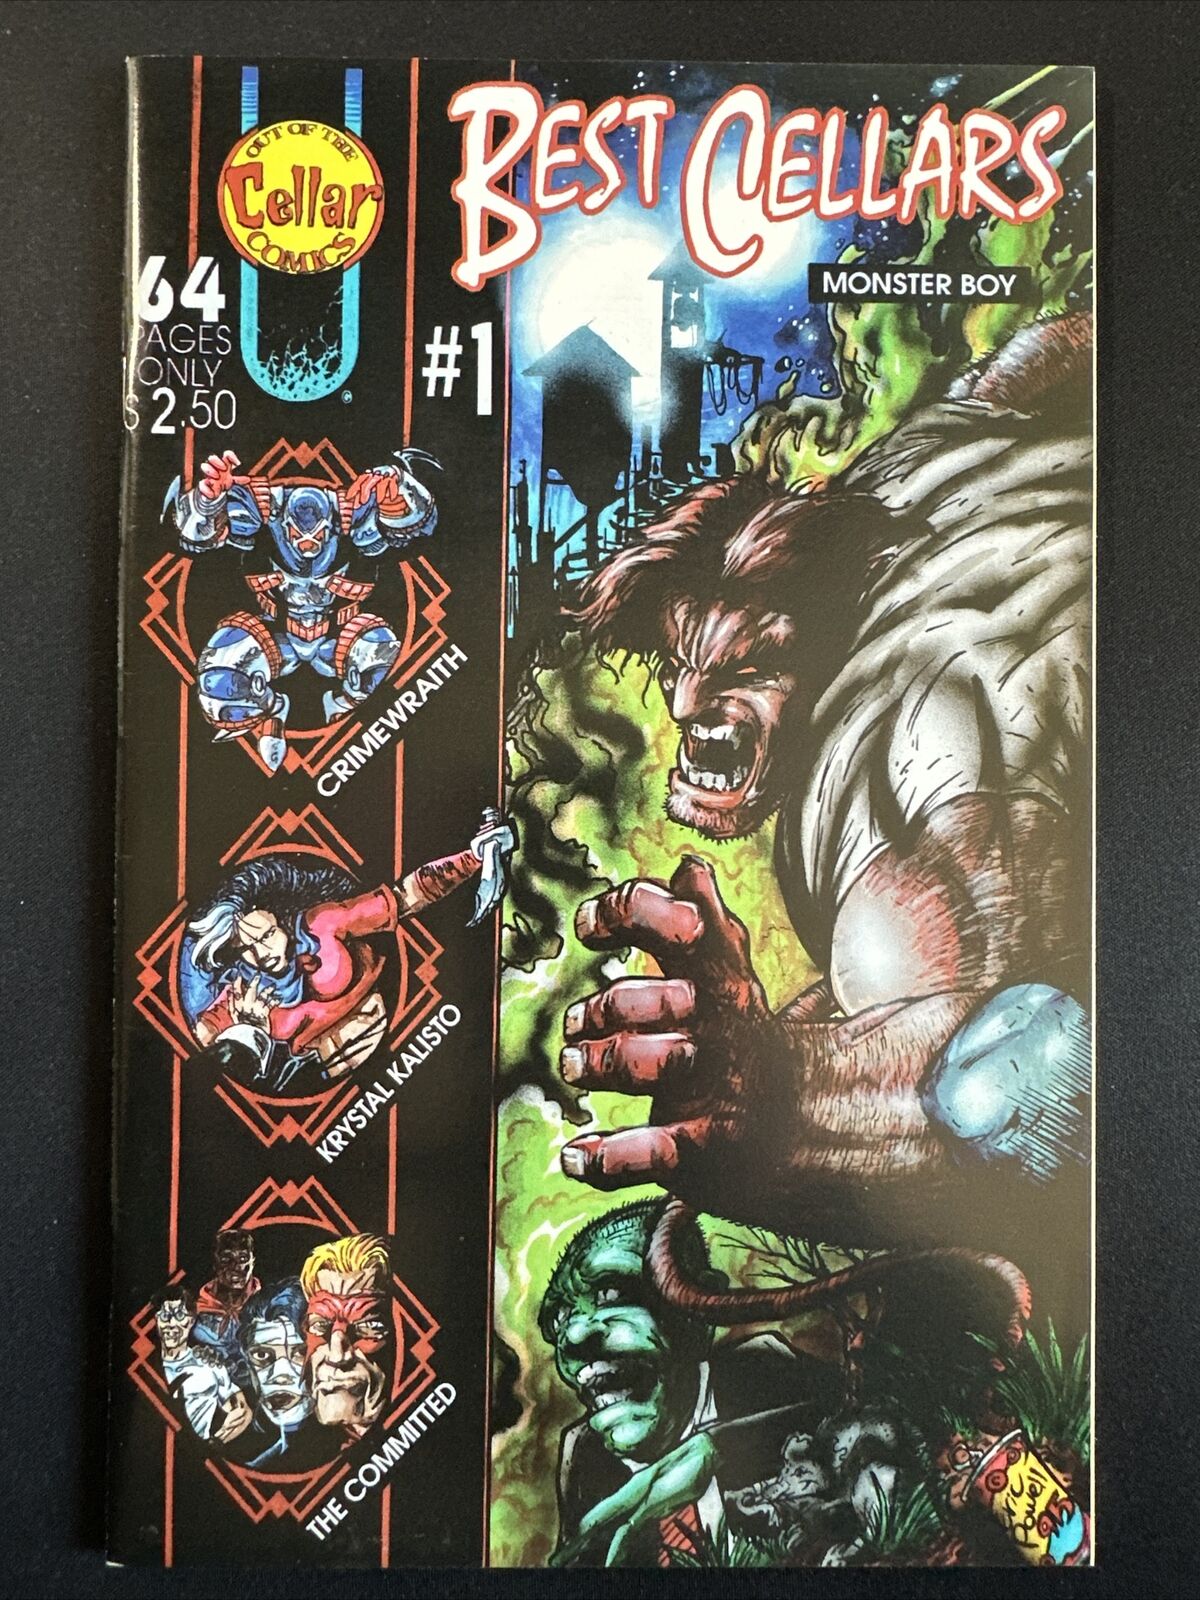 Best Cellars #1 Cellar Comics Early The Goon Prototype Appearance 1998 Very Fine